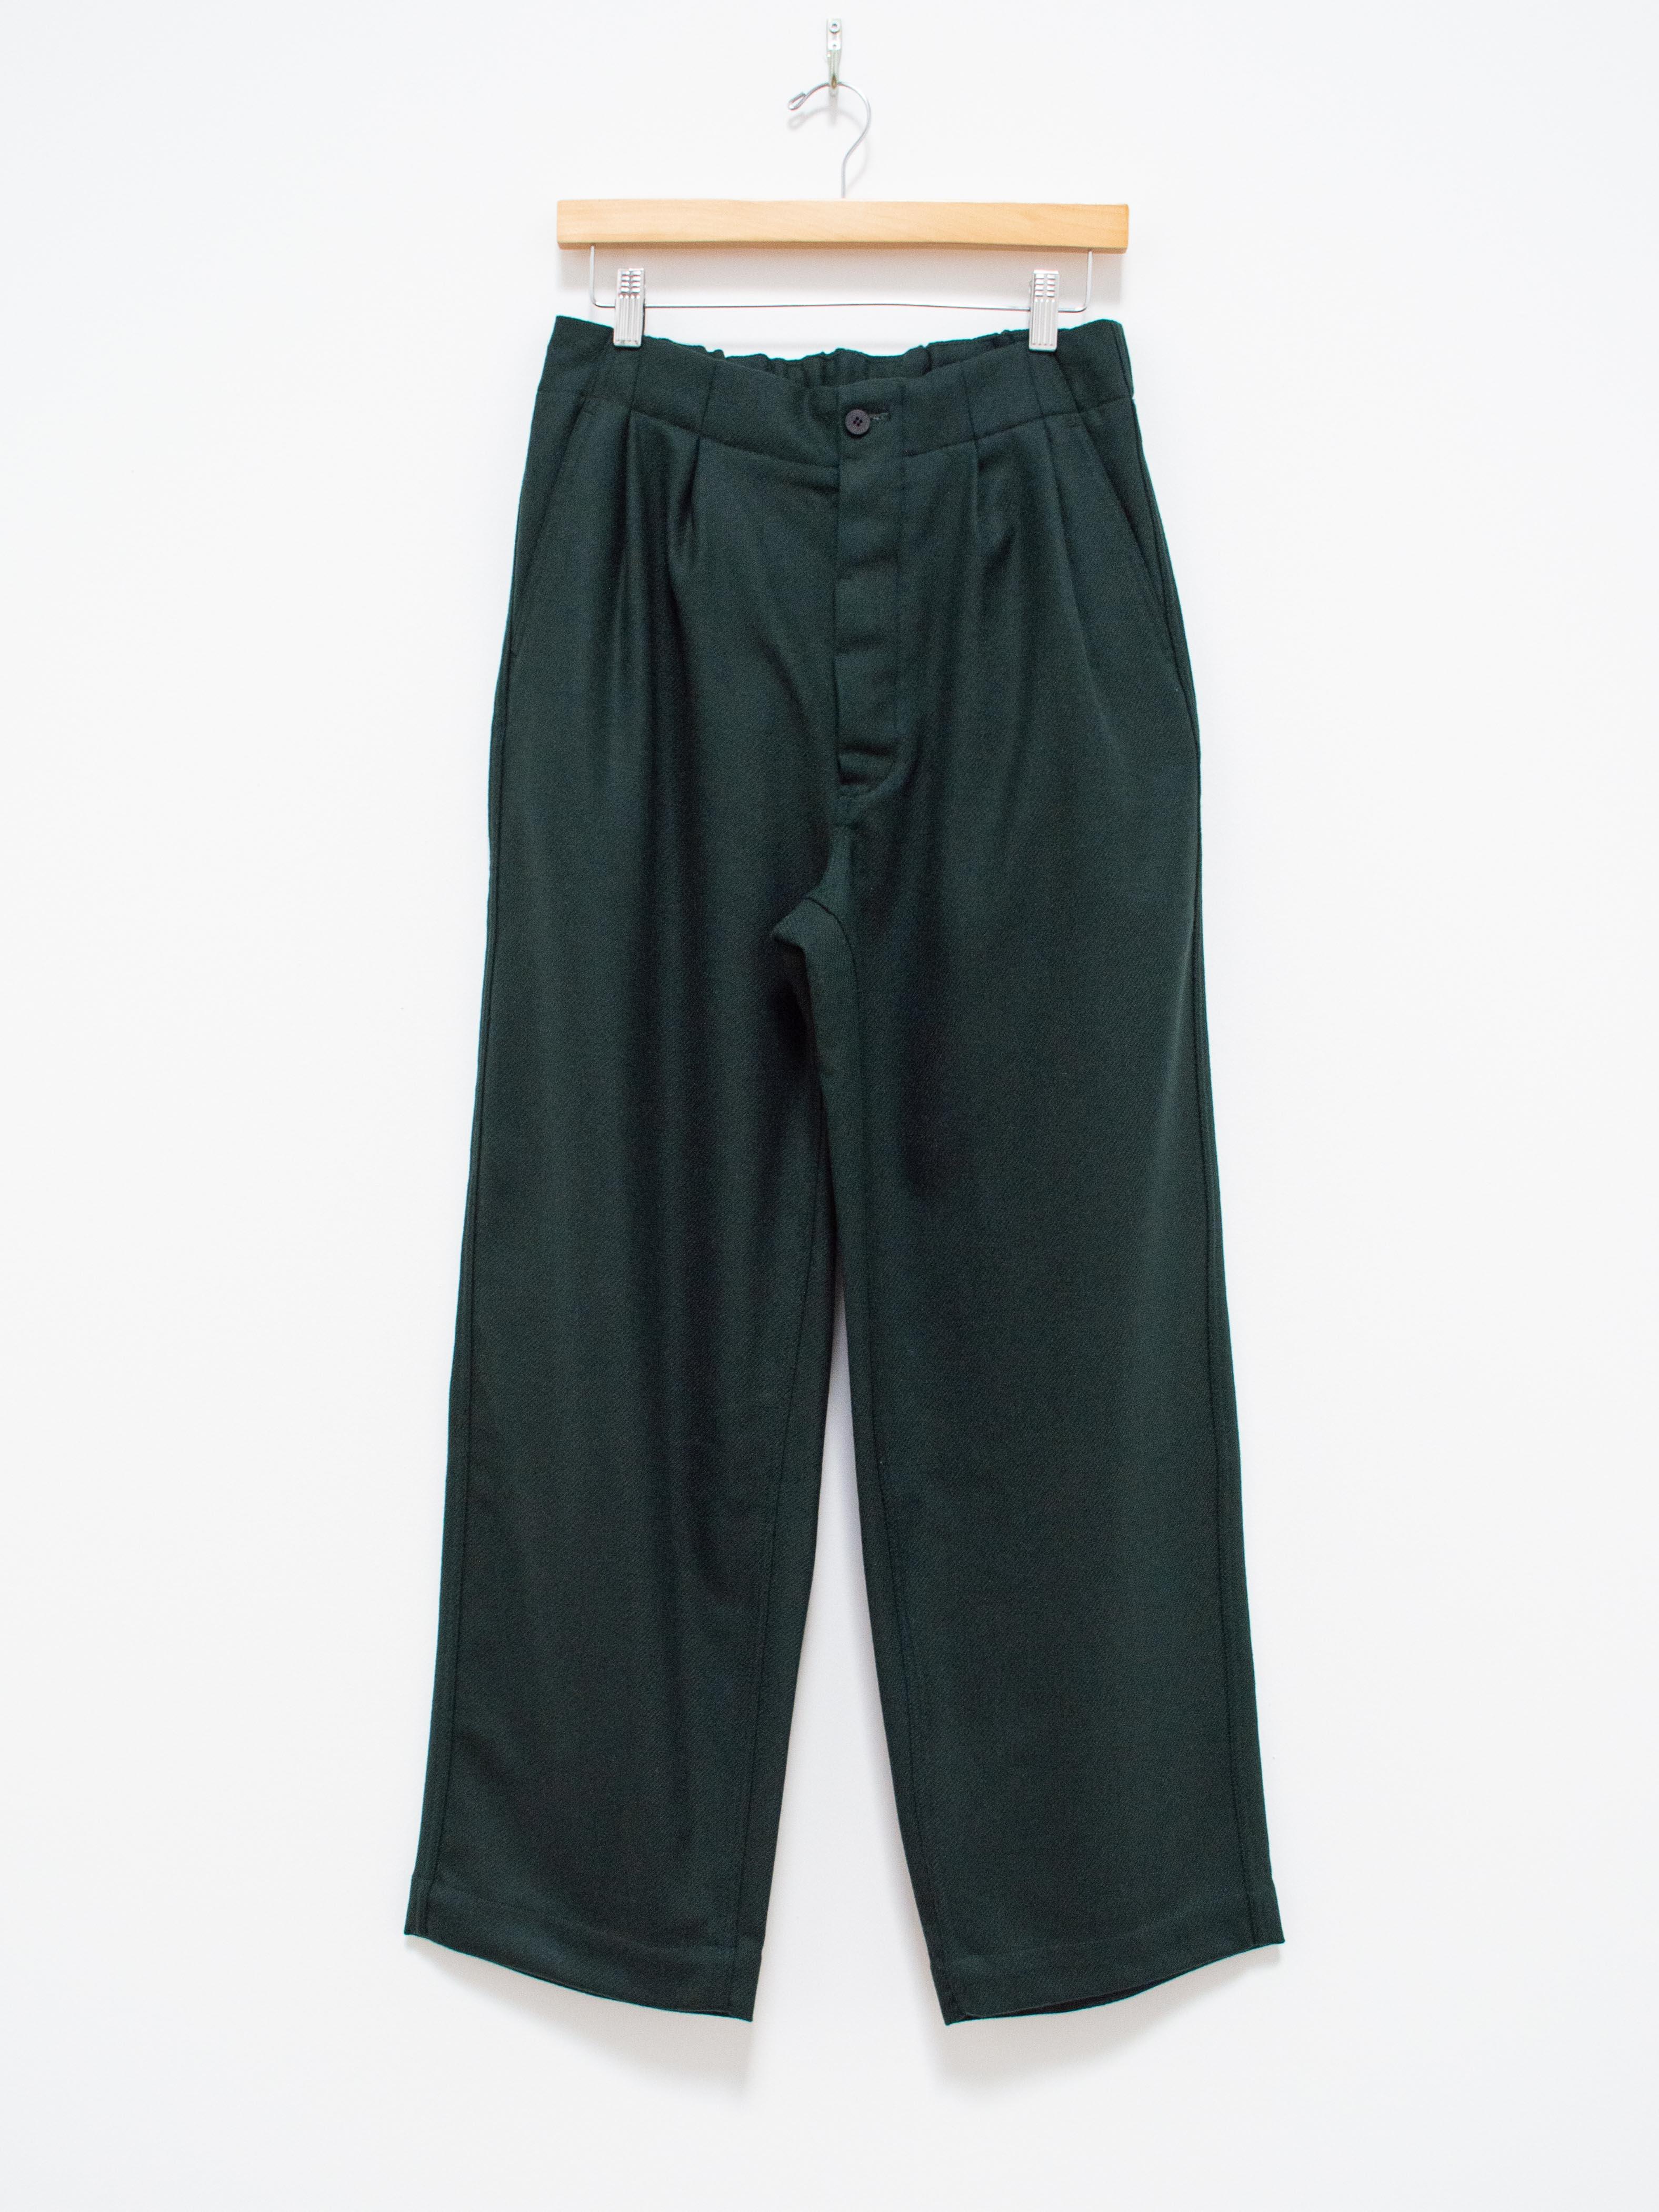 Namu Shop - Document English Wool Tucked Trousers - Forest